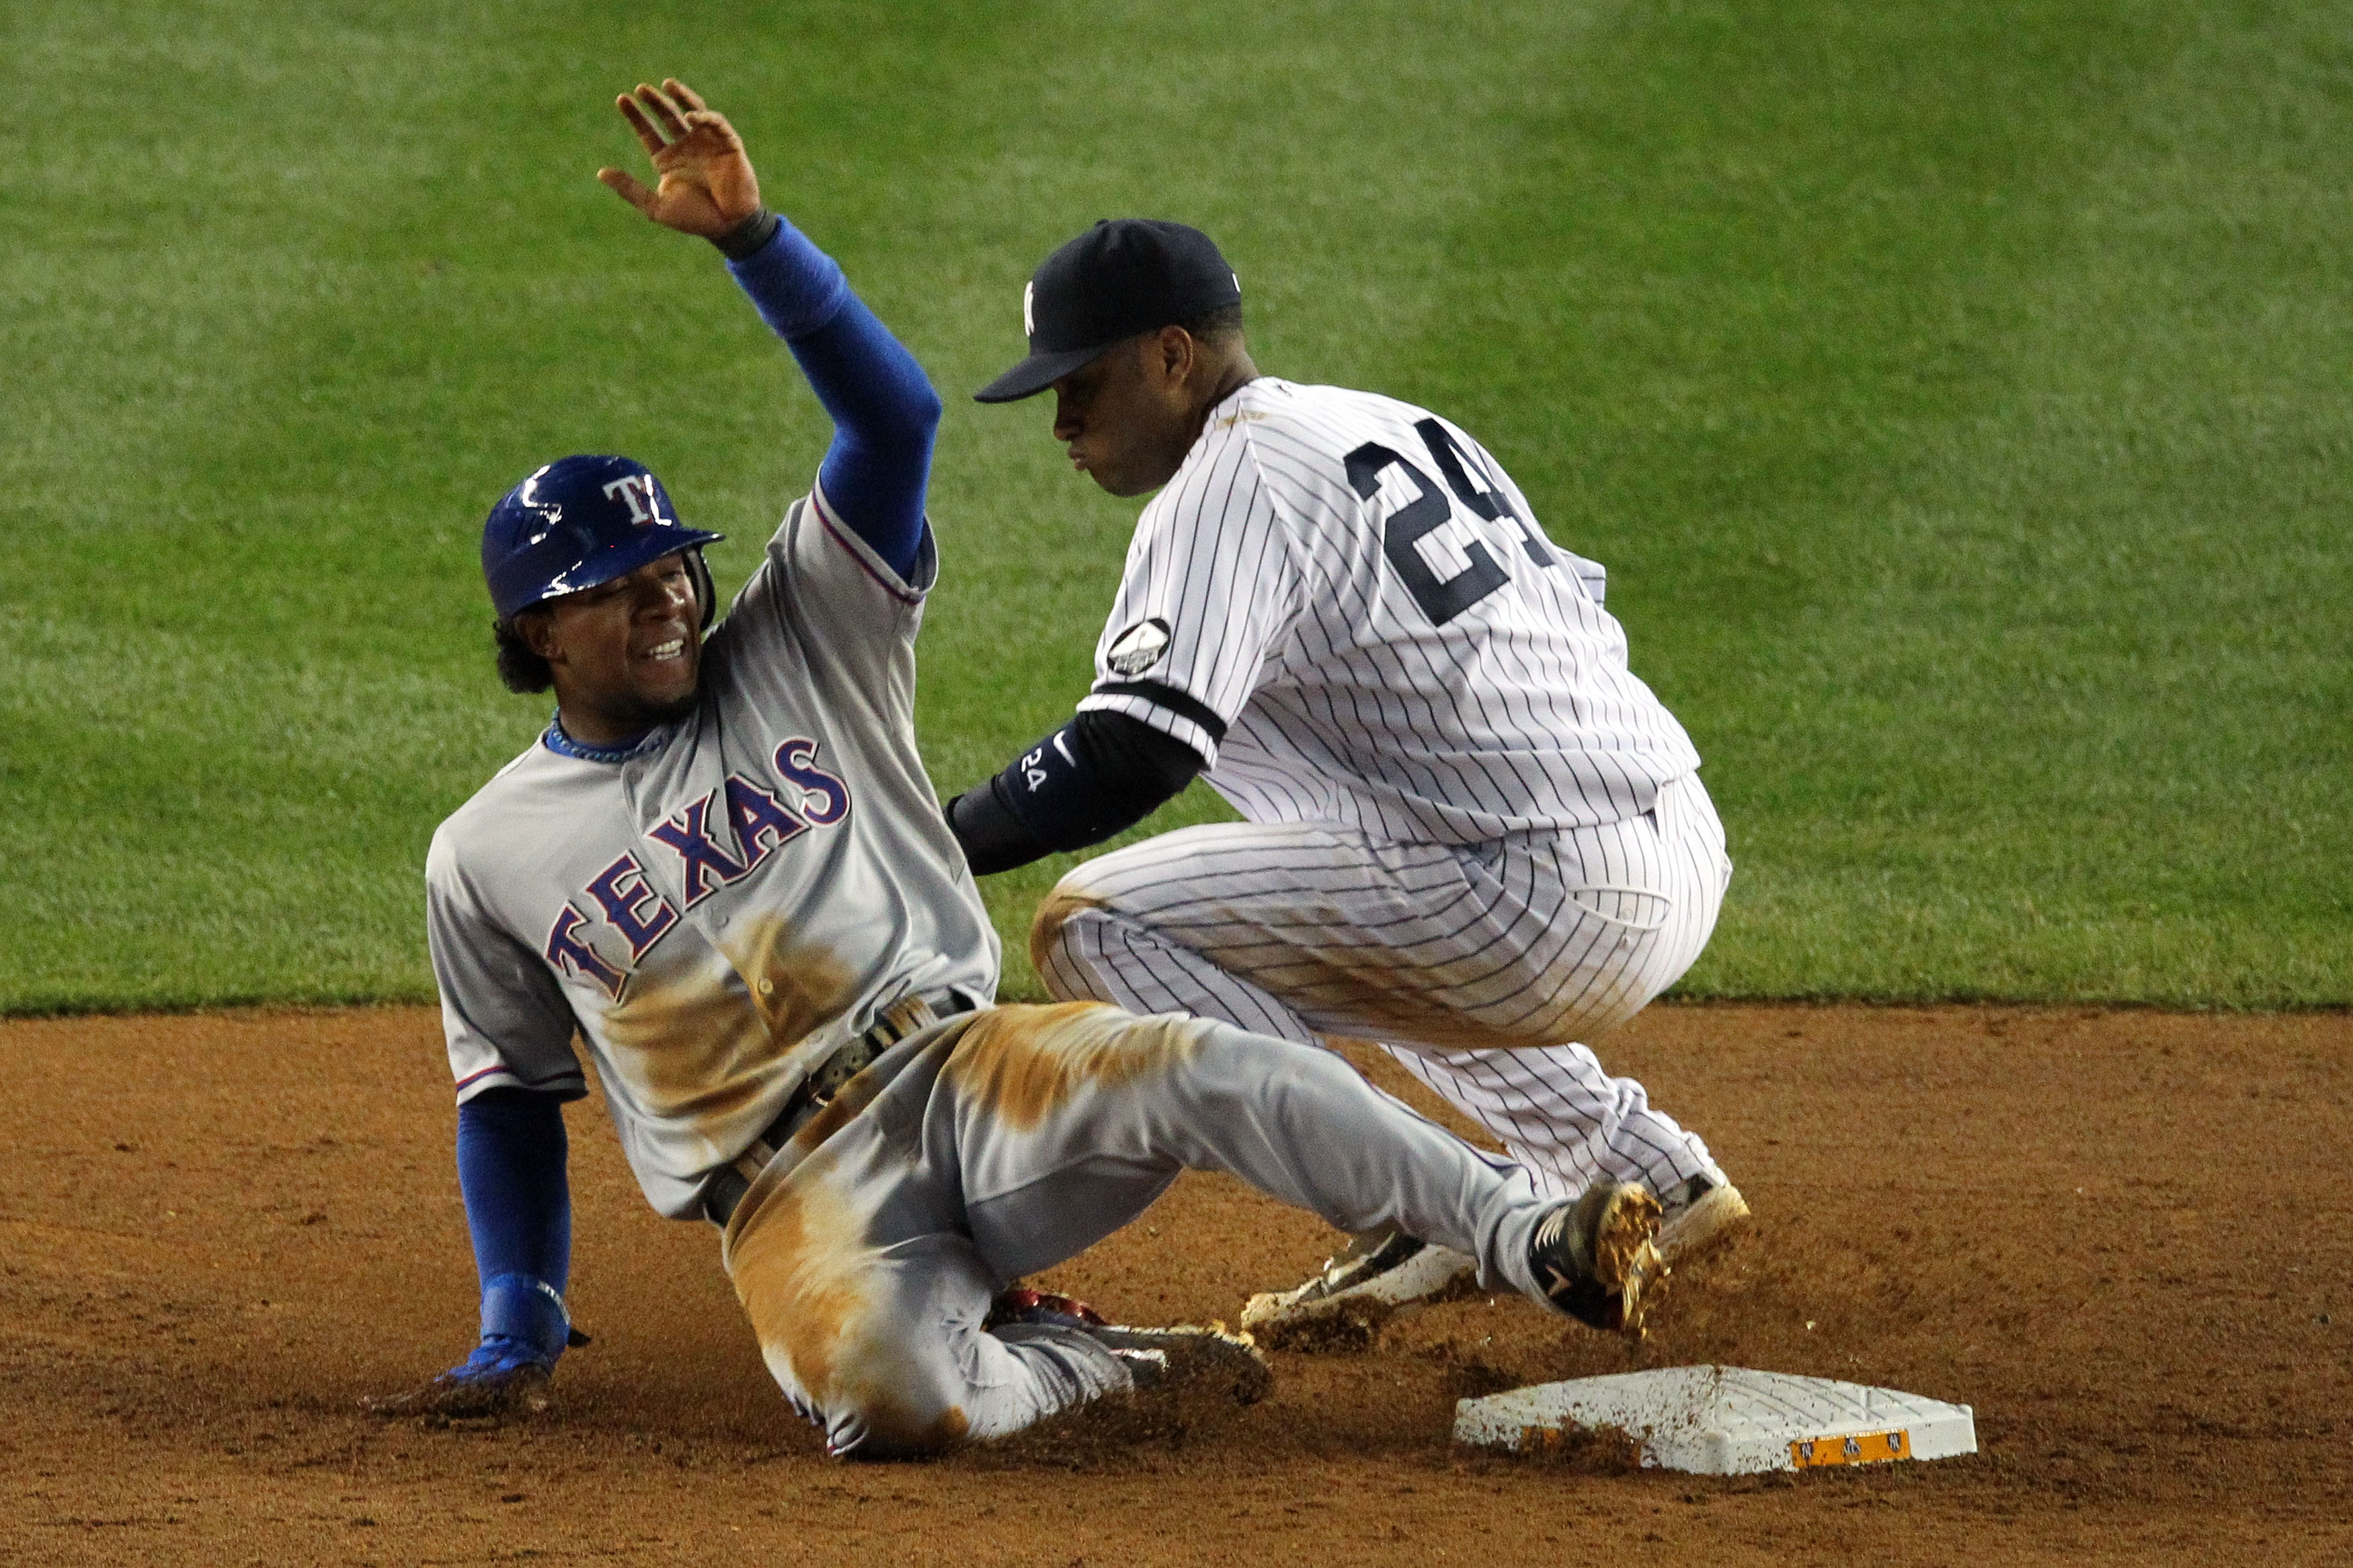 NEW YORK - OCTOBER 19: Elvis Andrus #1 of the Texas Rangers steals second base against Robinson Cano #24 of the New York Yankees in Game Four of the ALCS during the 2010 MLB Playoffs at Yankee Stadium on October 19, 2010 in the Bronx borough of New York C